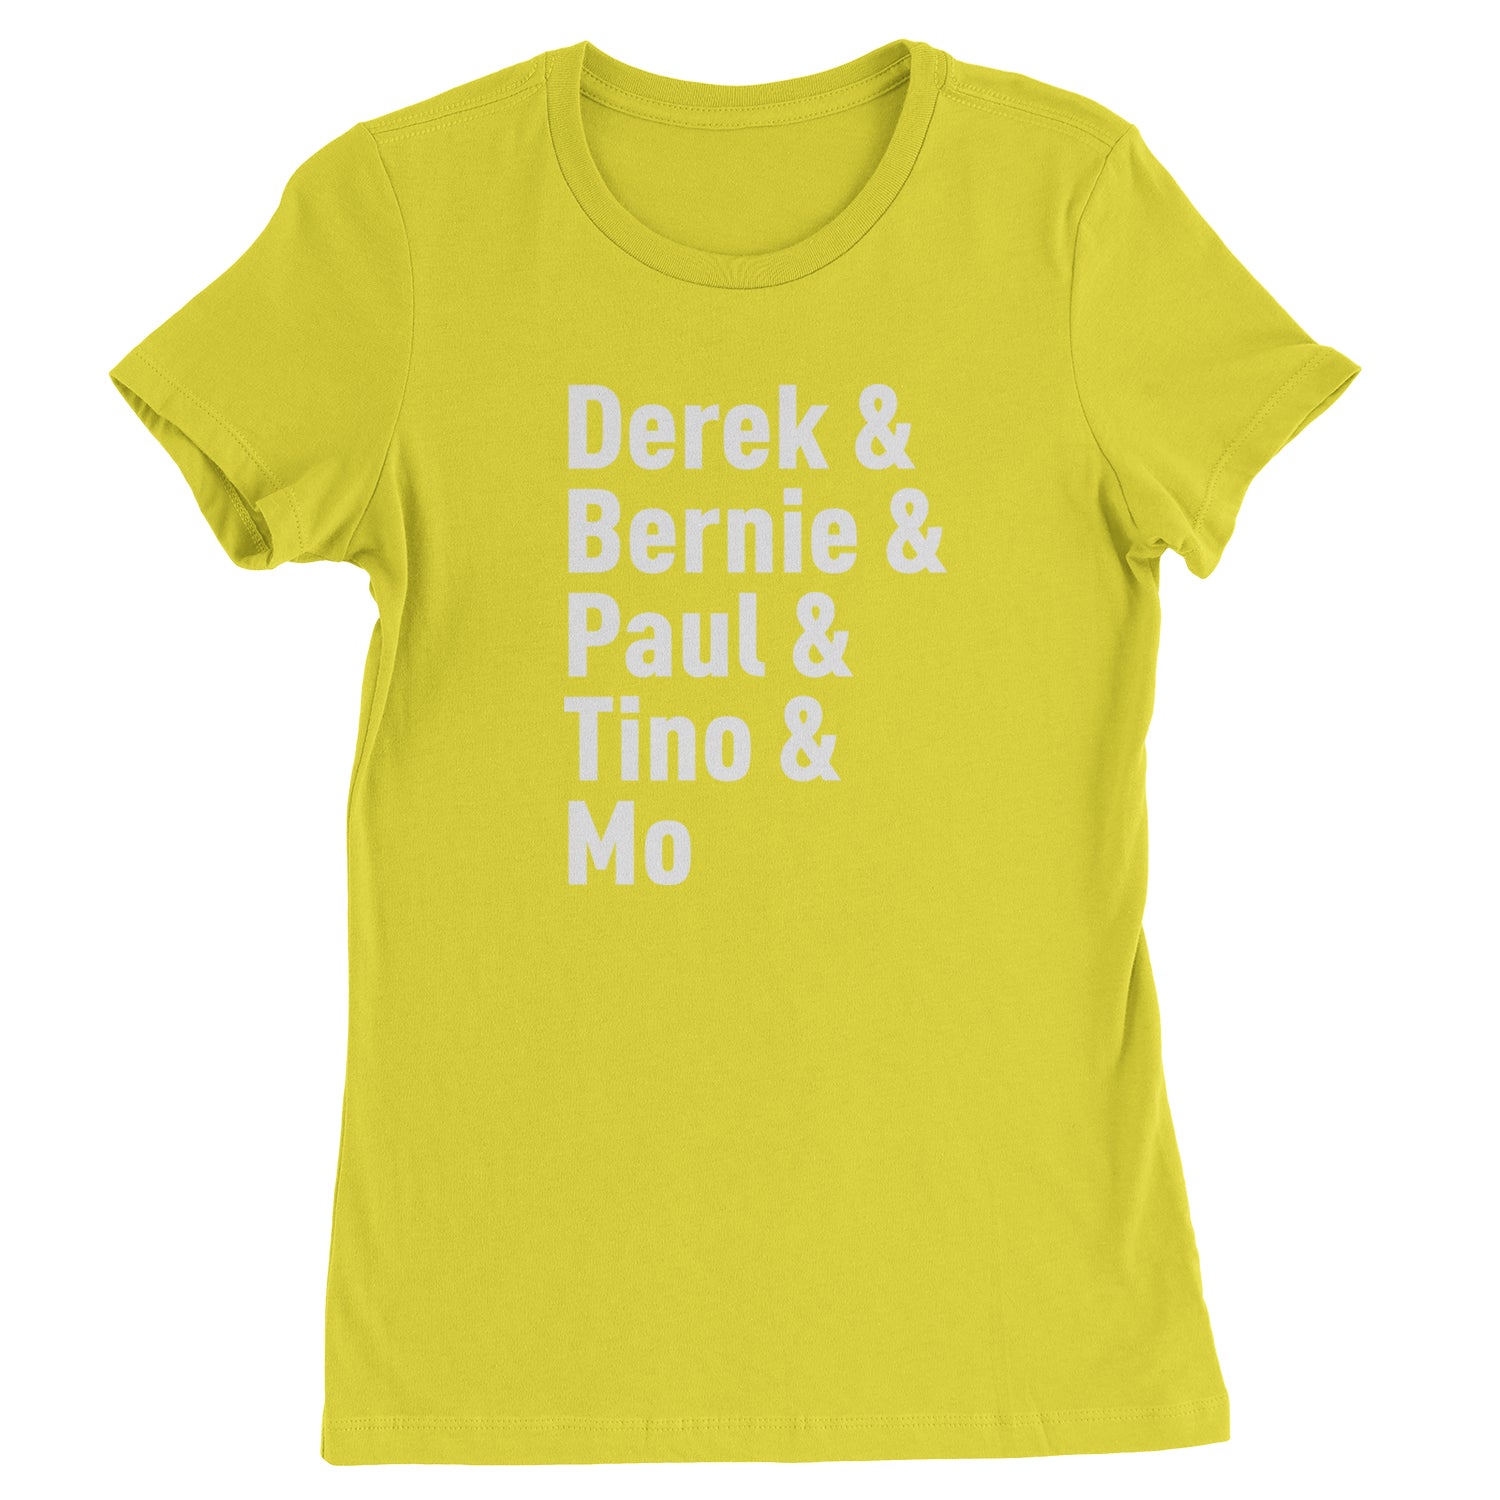 Derek and Bernie and Paul and Tino and Mo Womens T-shirt baseball, comes, here, judge, the by Expression Tees